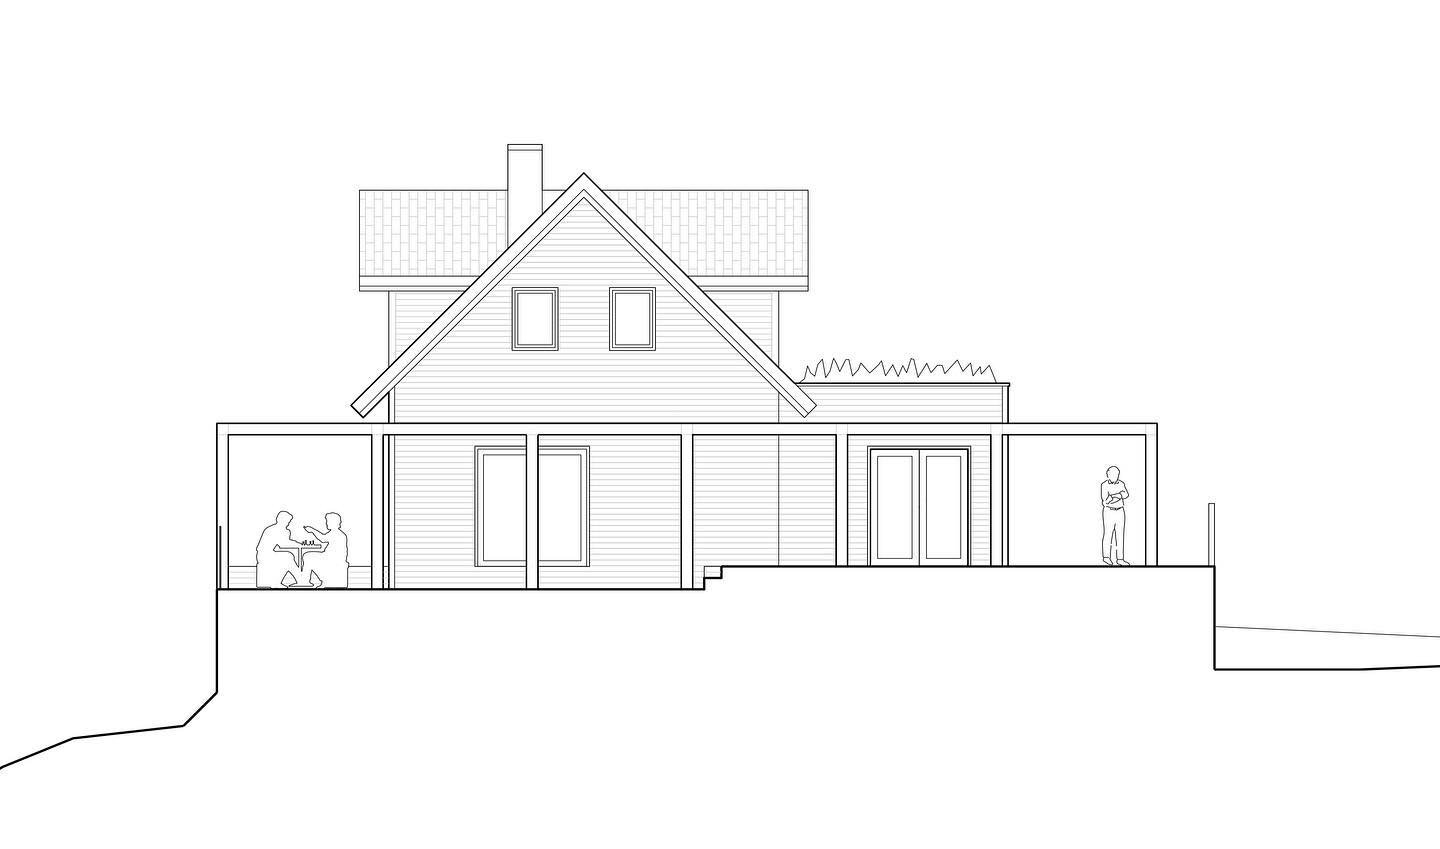 Transformation in T&auml;lj&ouml; - new extension, altan and pergola added to an existing villa outside &Aring;kersberga.

Swipe ⬅️ for existing fasad drawing.

Project currently awaiting bygglov.

#workinprogress 
@rushtonarkitektur 

#ladhus #ladhu